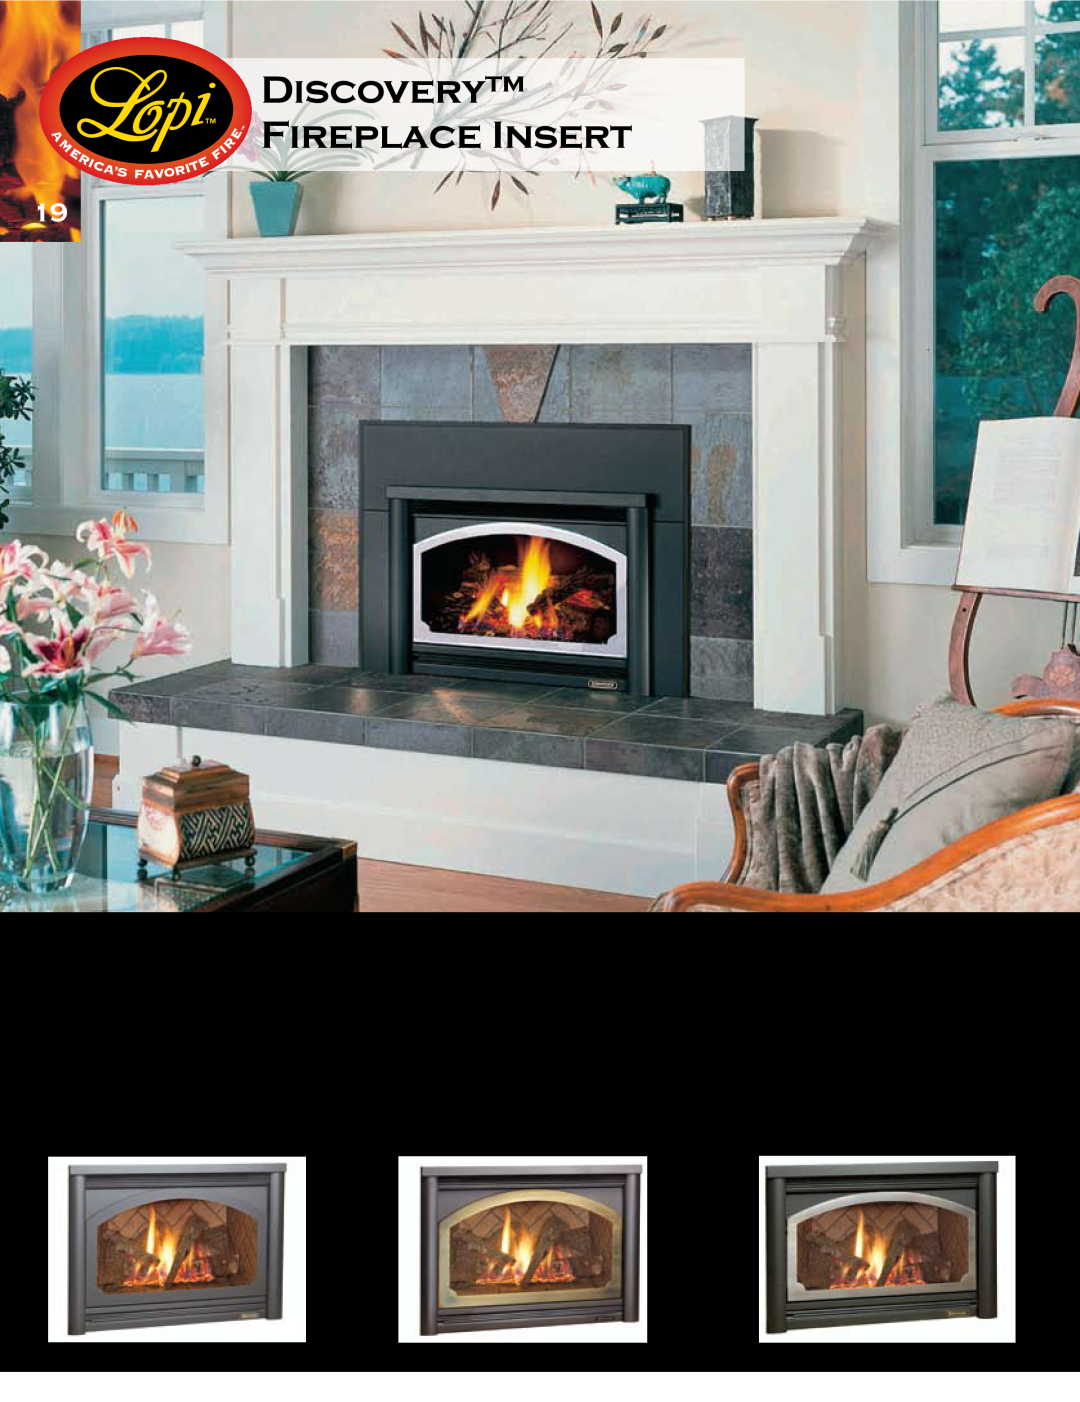 Lopi Gas Stove And Fireplace manual Discovery Fireplace Insert, Antique Gold Plated Door 